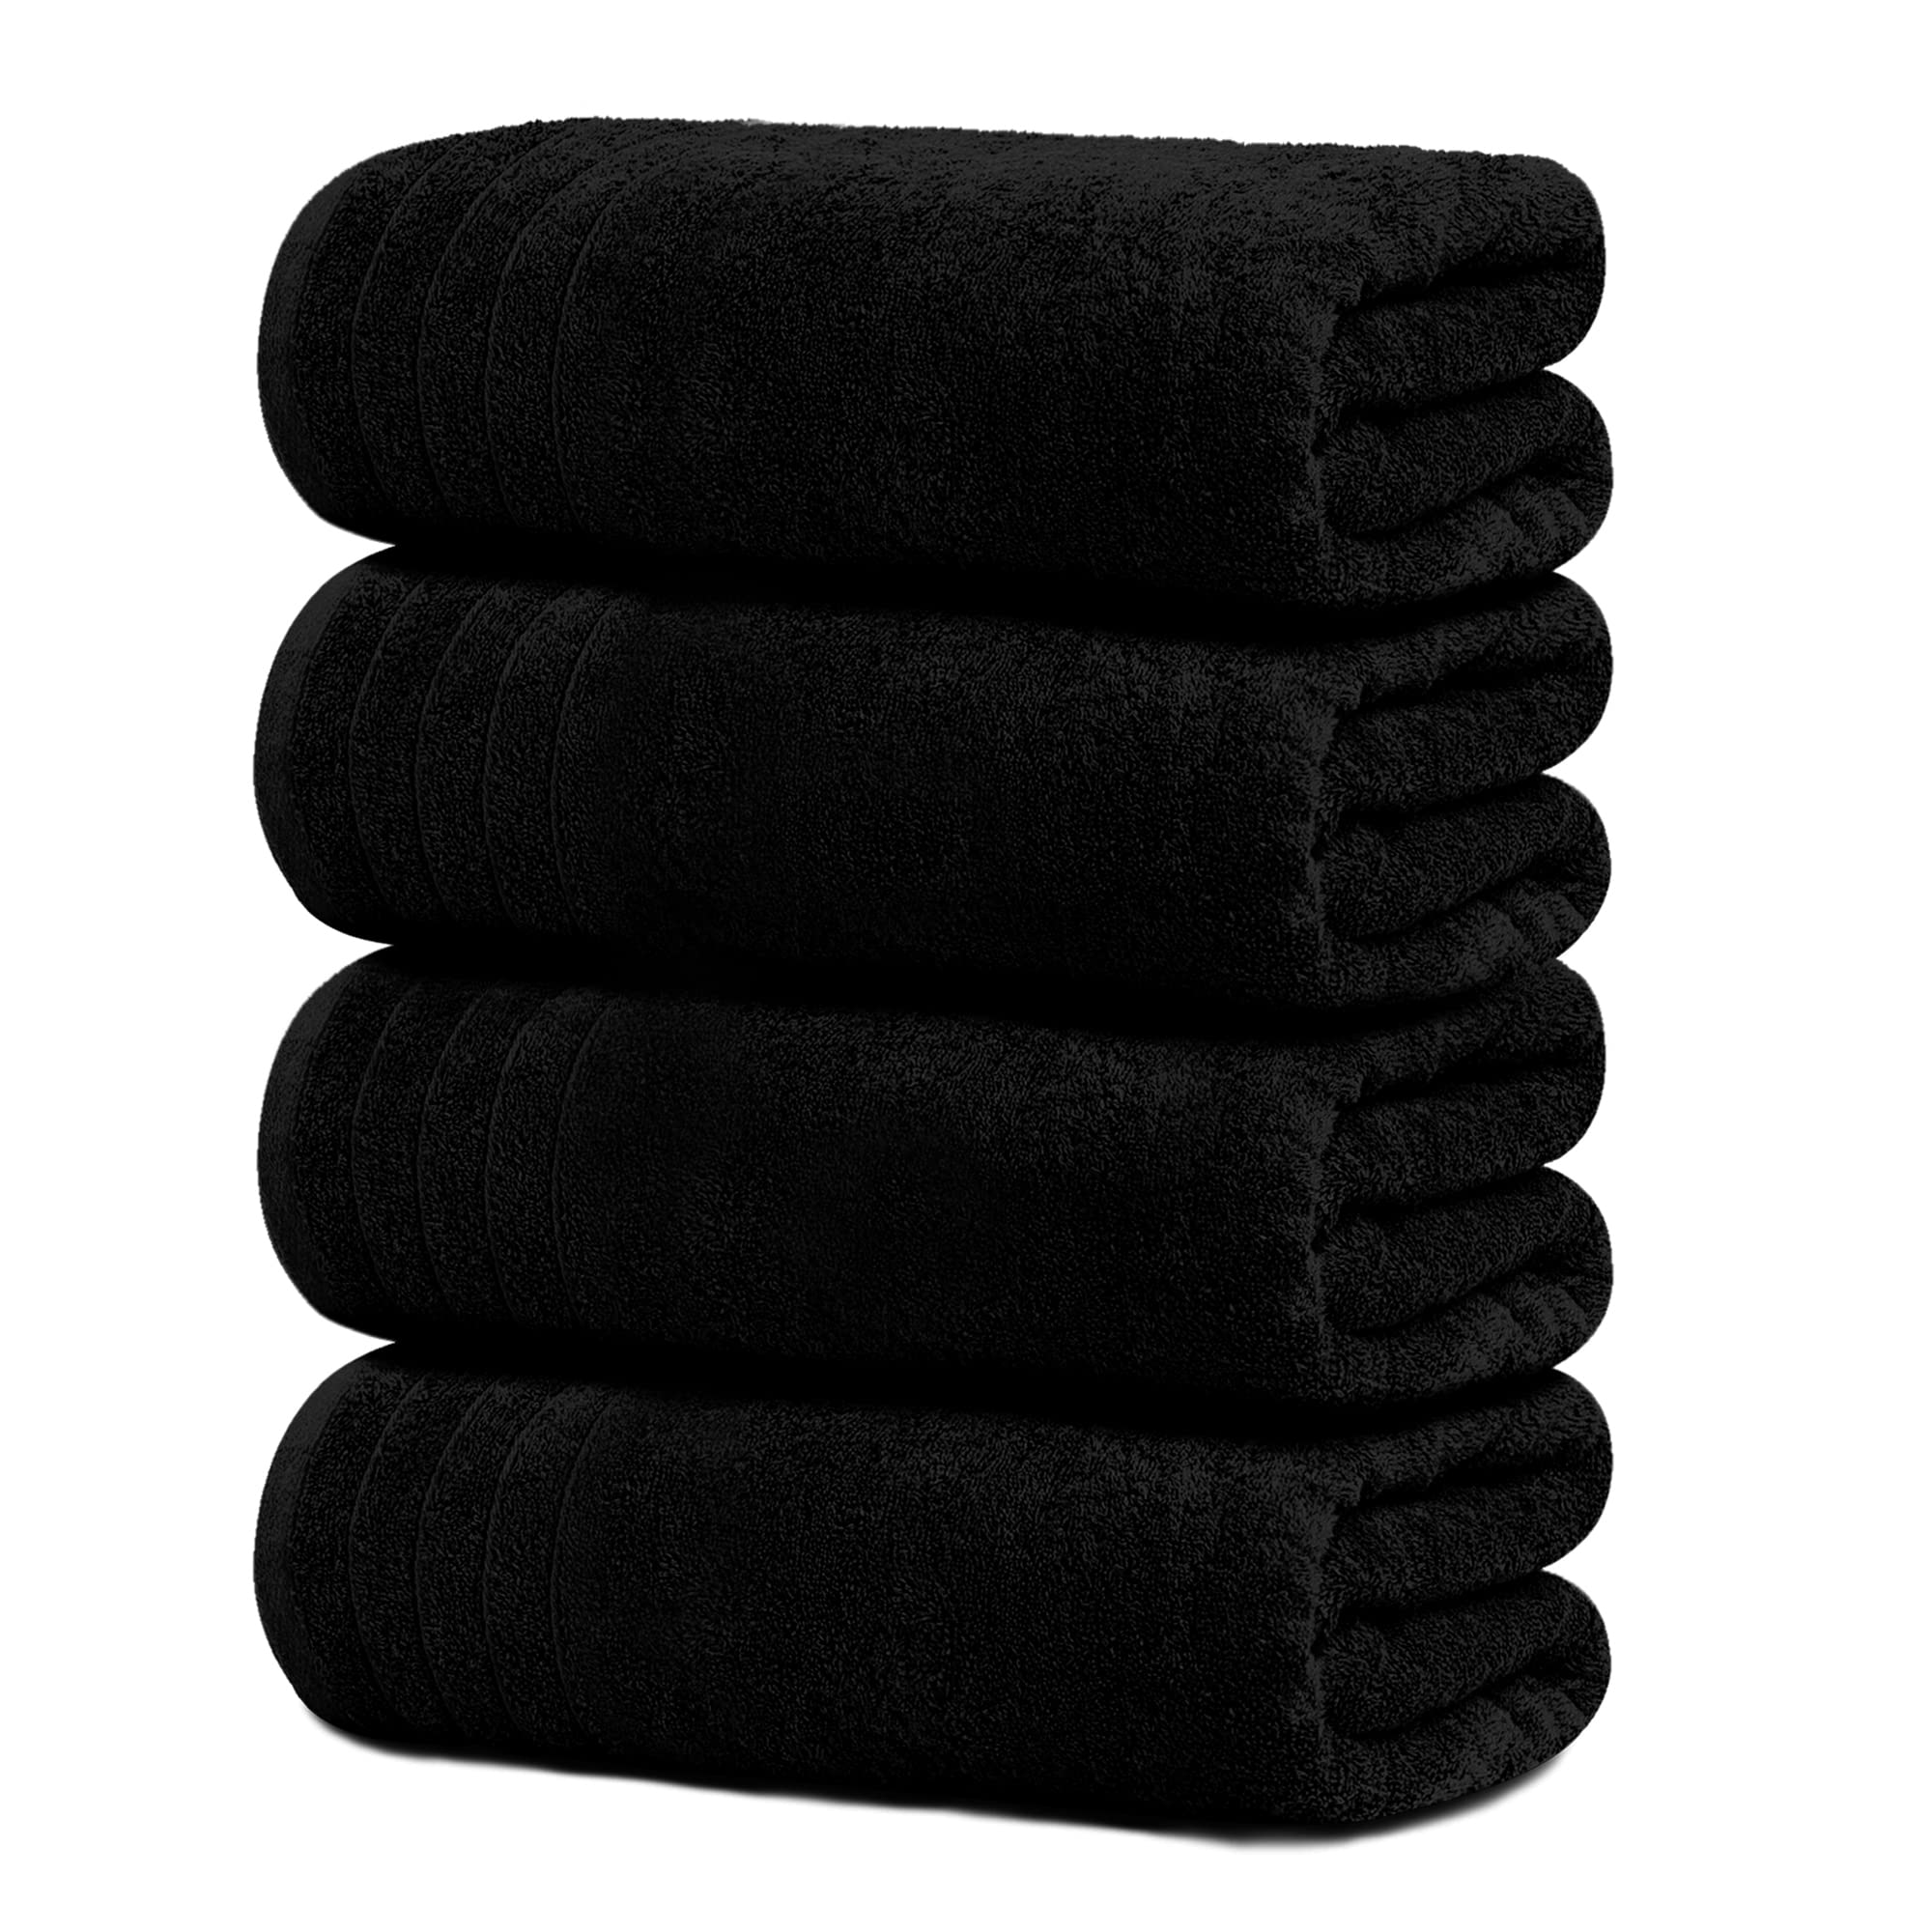 Tens Towels Large Bath Towels, 100% Cotton Towels, 30 x 60 Inches, Extra  Large, Lighter Weight & Super Absorbent, Quick Dry, Perfect Bathroom Towels